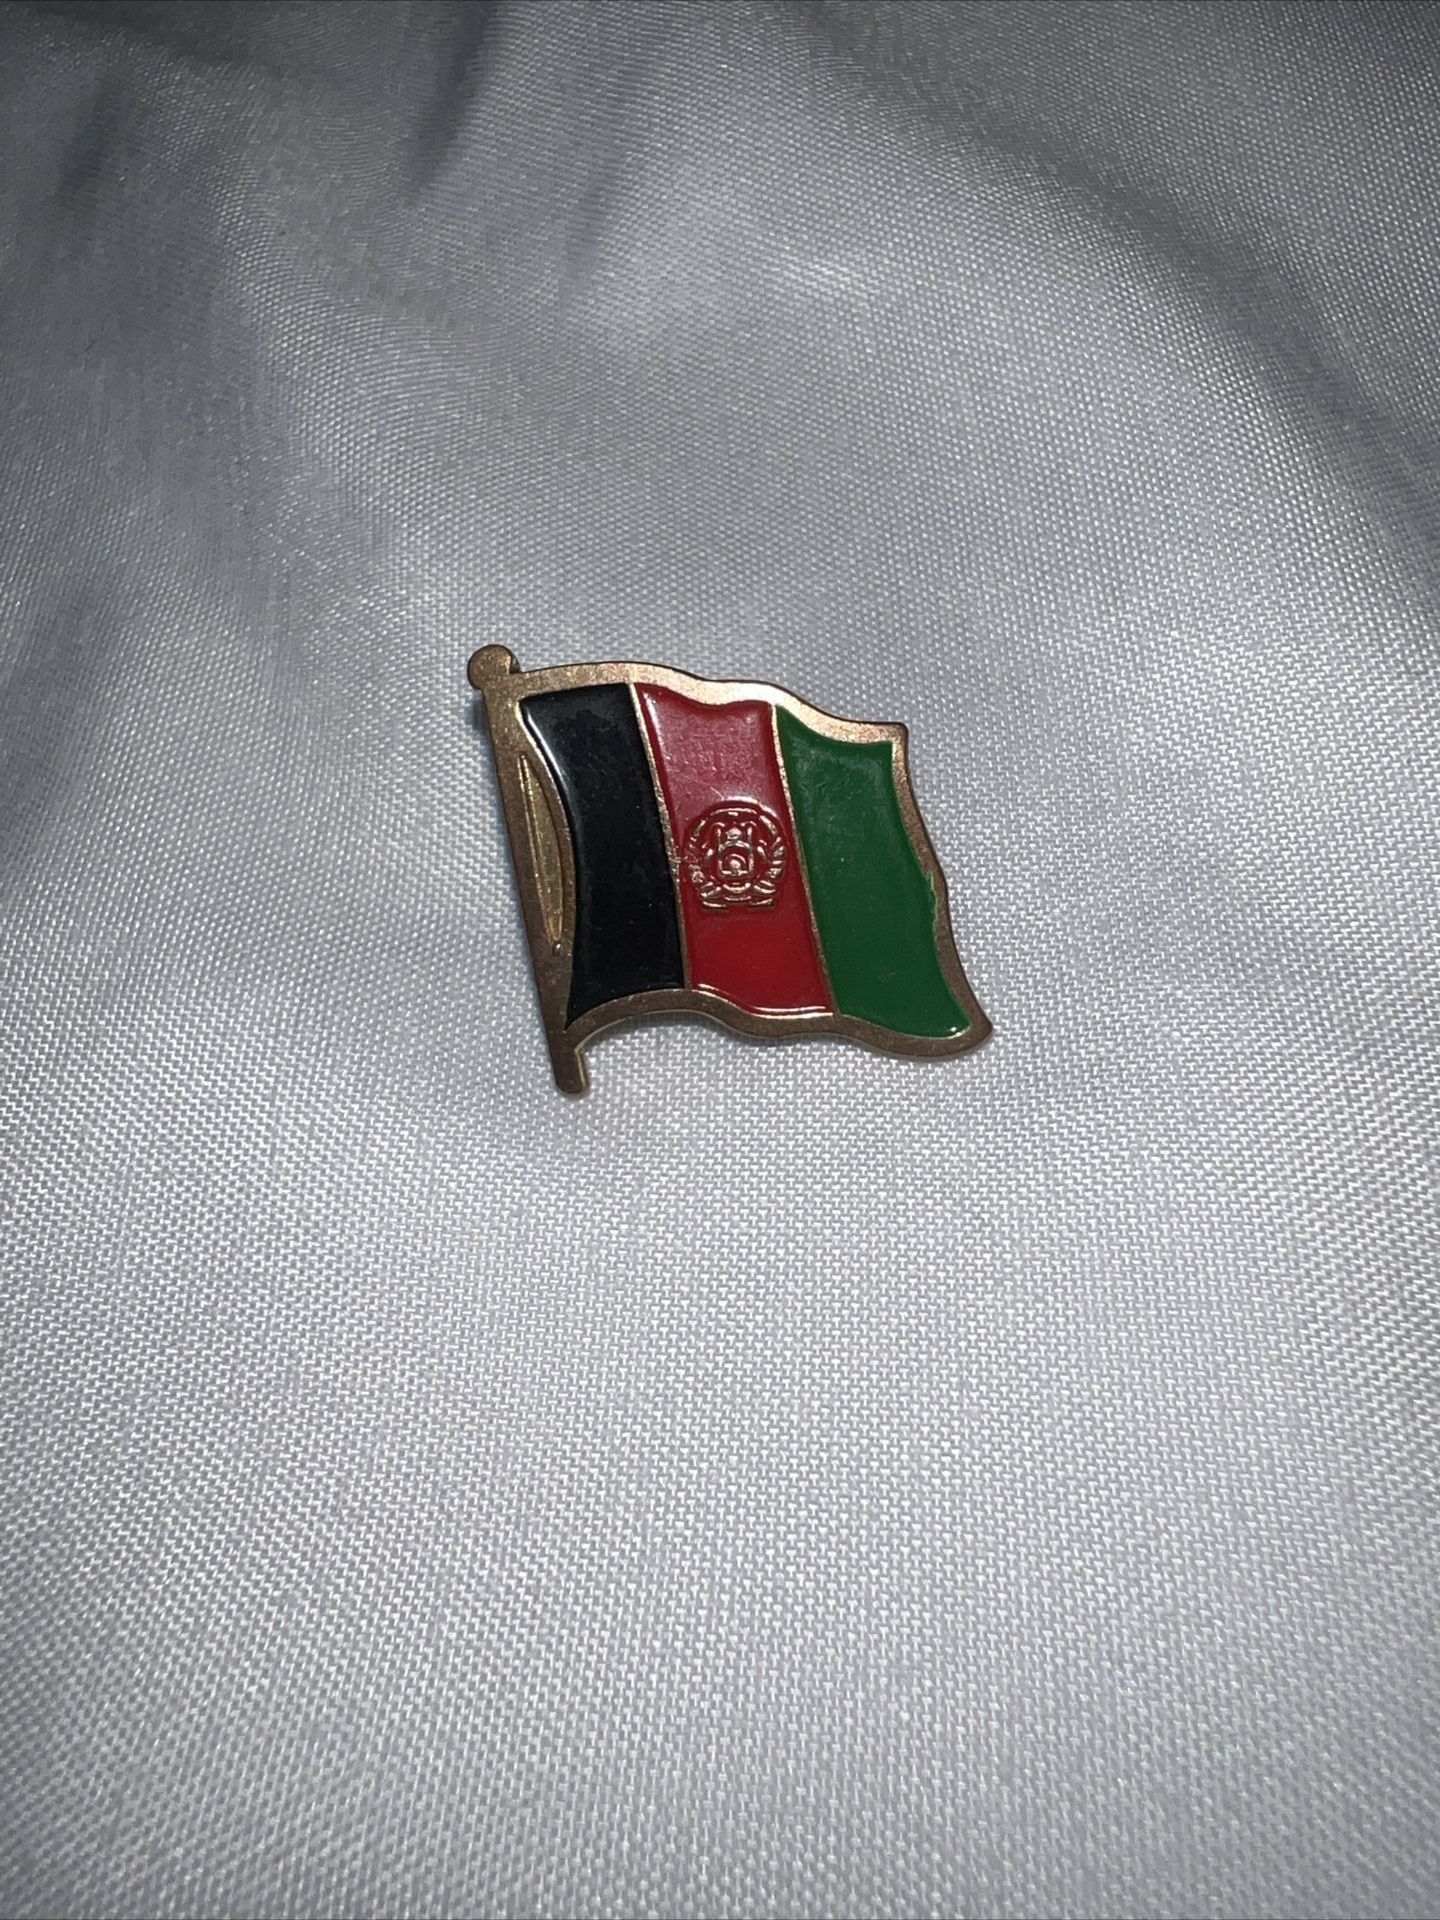 Lapel Pin Afghanistan Flag Tie Tack Black Red Green Flag